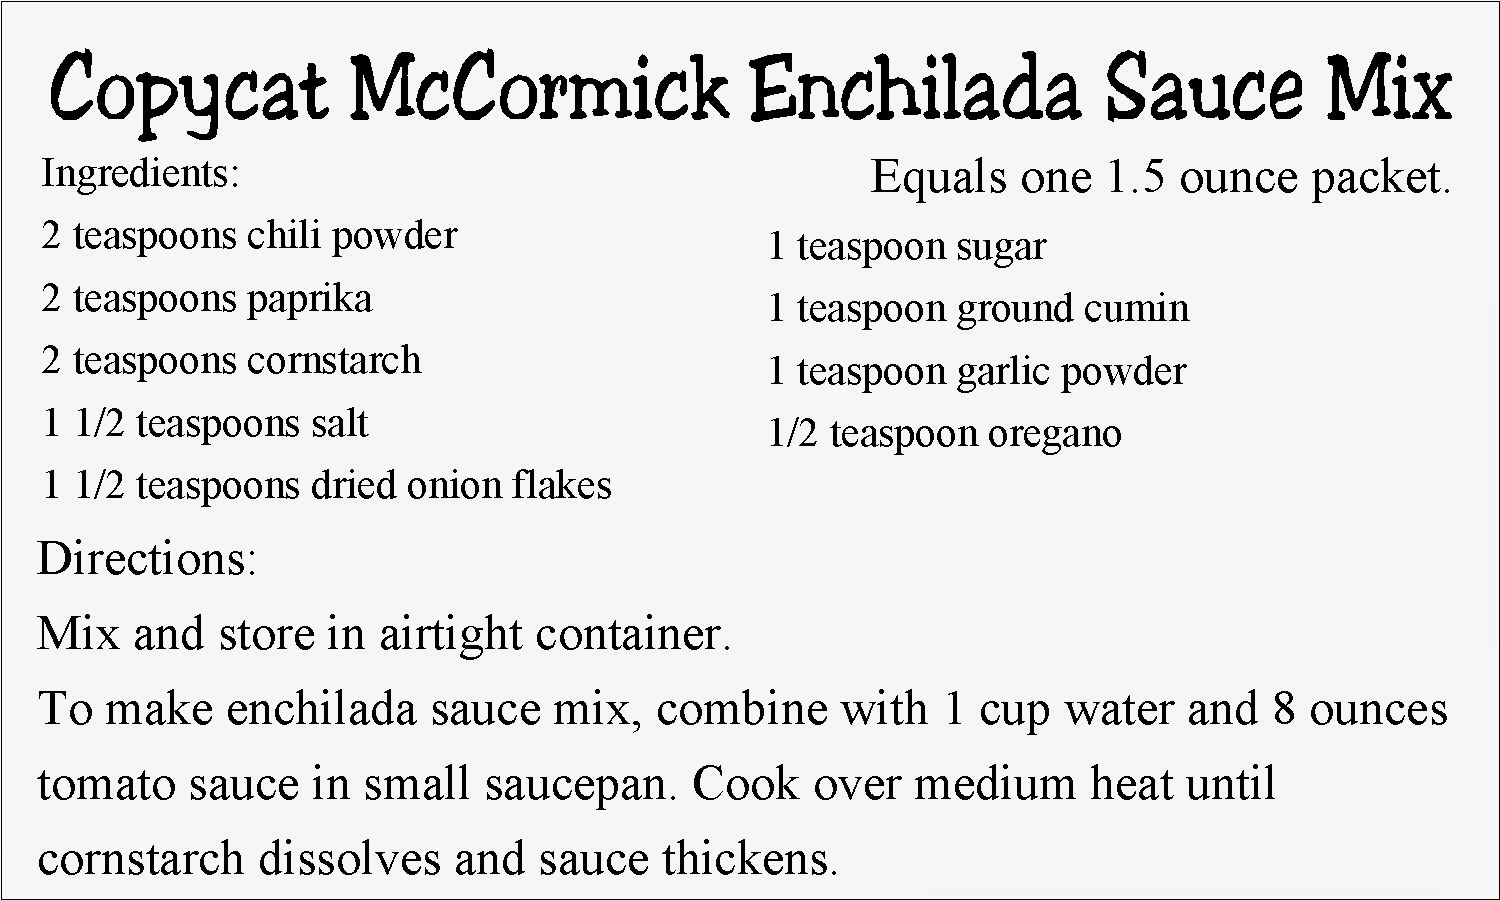 Save money and eat healthier with this copycat version of McCormick's Enchilada Sauce Mix.  Using items you probably already have in your kitchen, you can make a delicious enchilada sauce mix that saves a trip to the store.